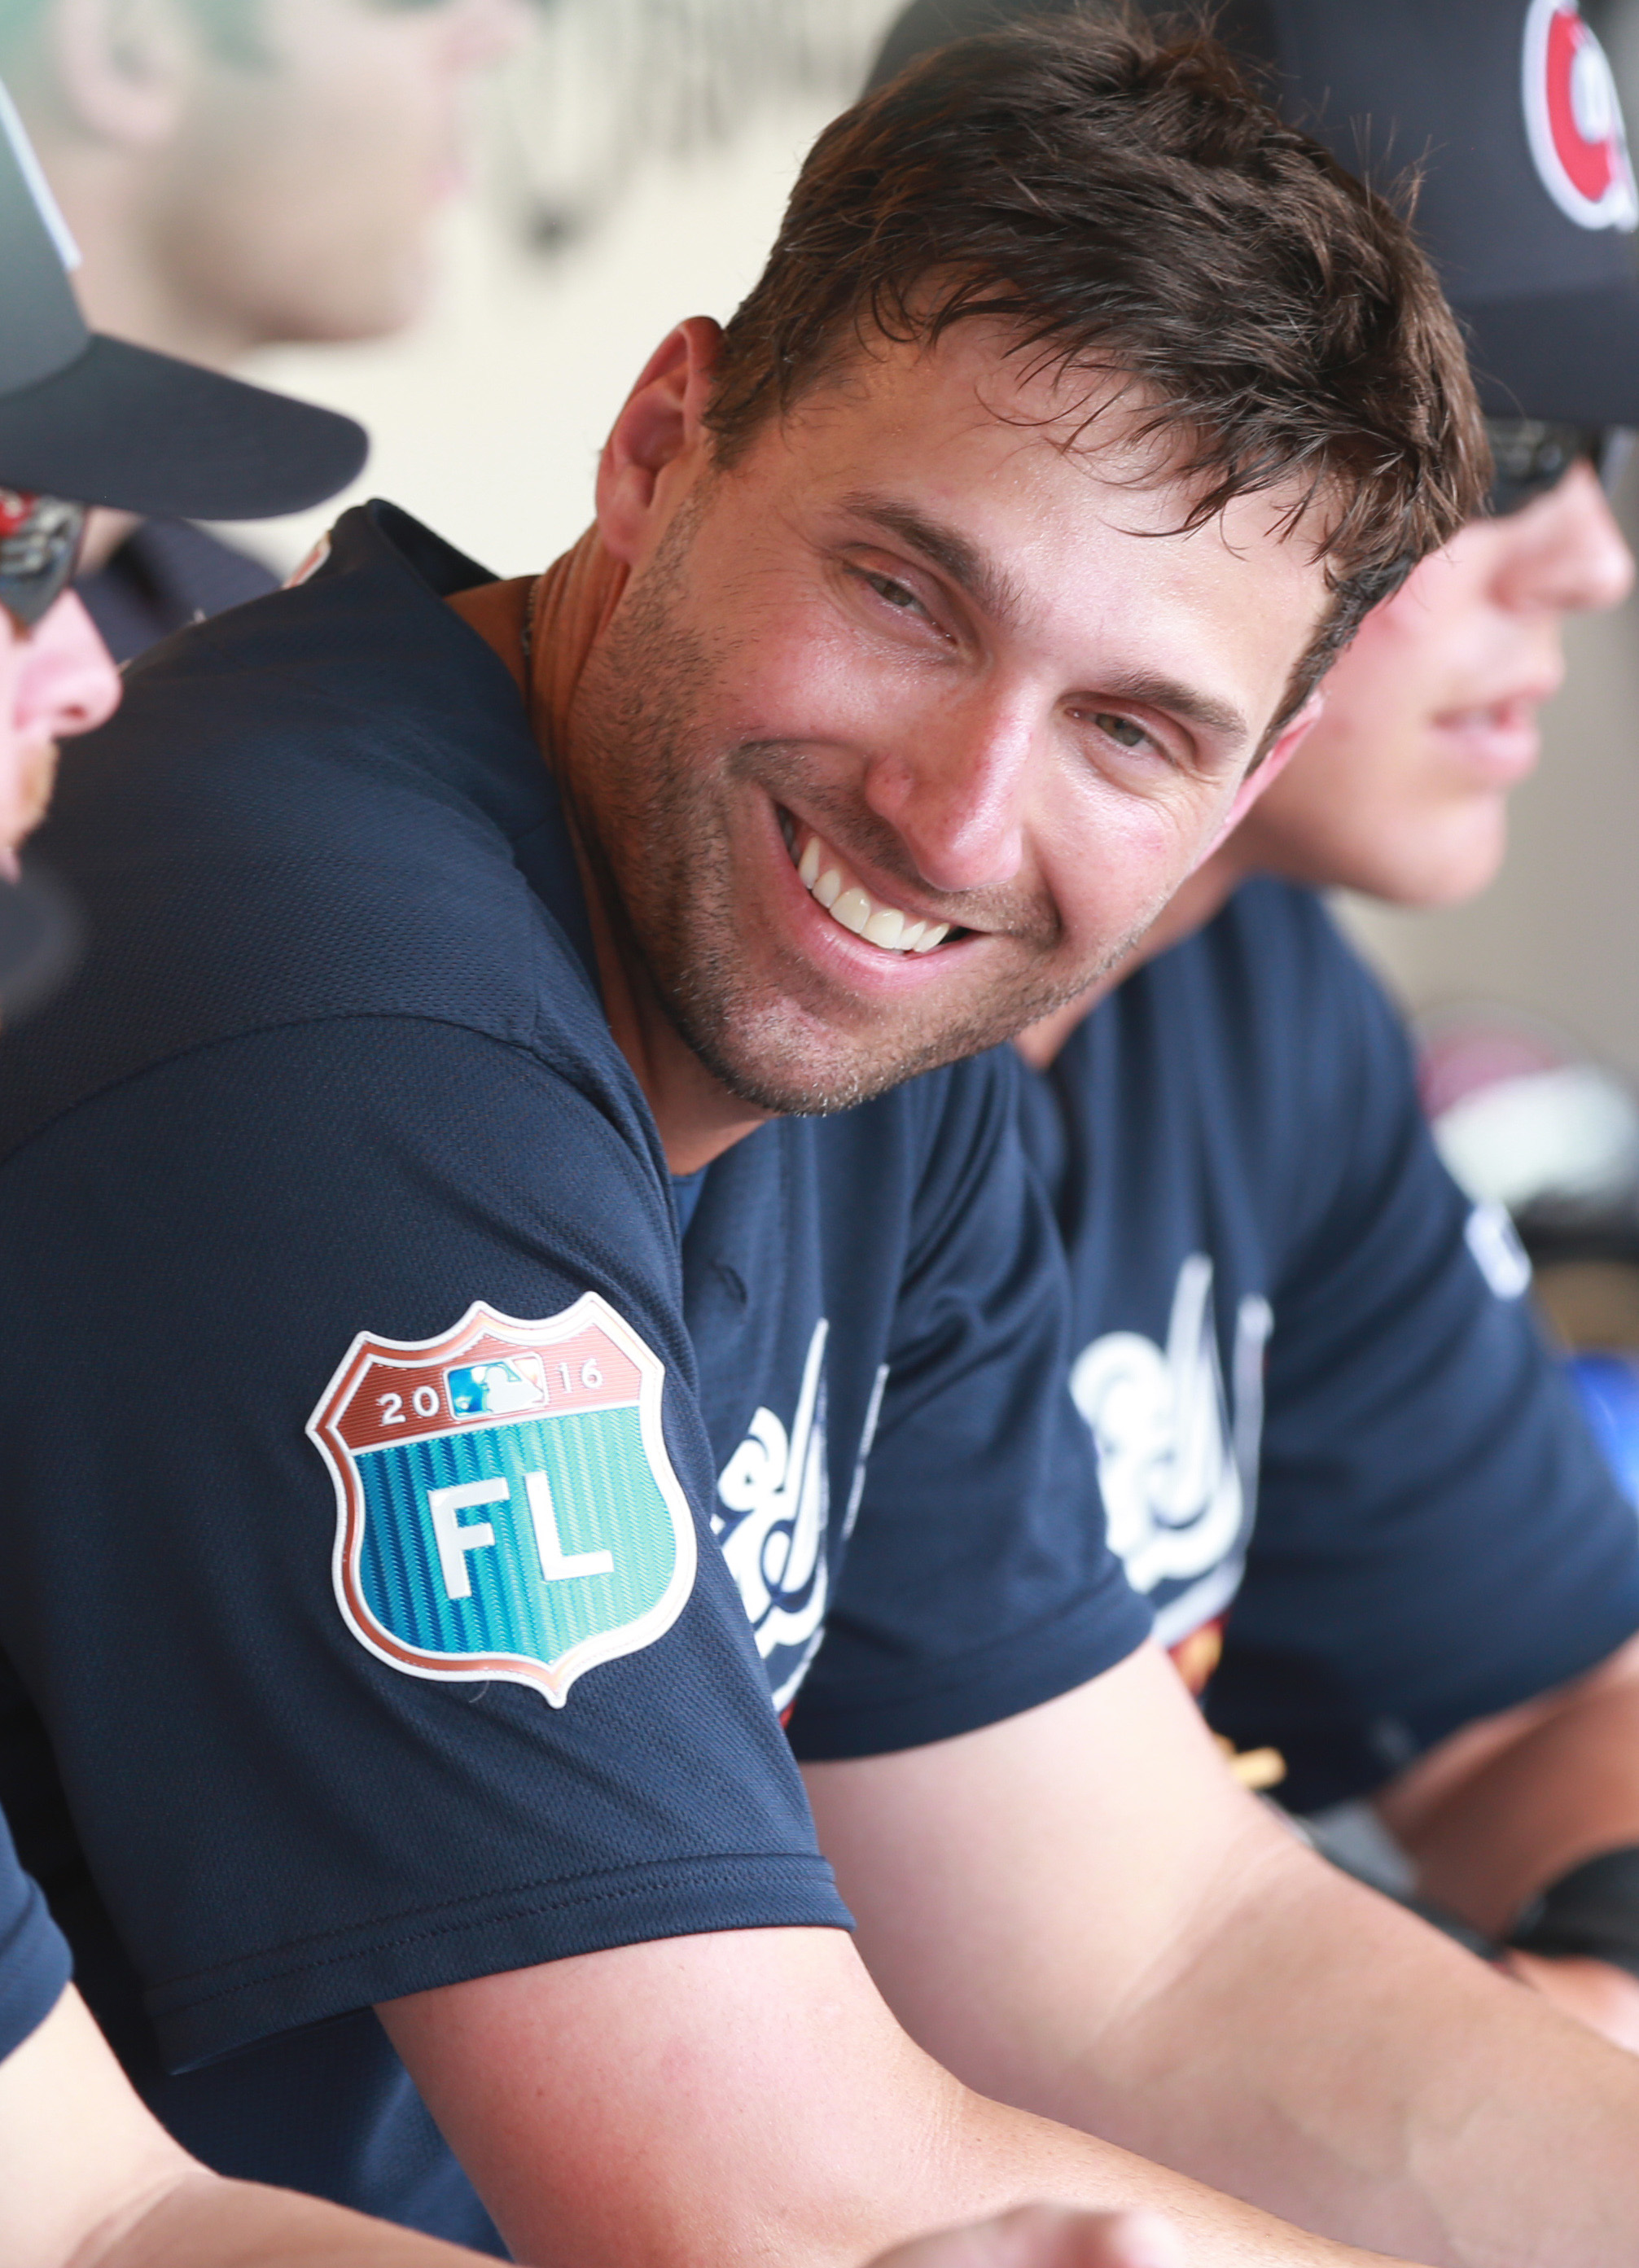 Braves sign Jeff Francoeur to minor-league deal - MLB Daily Dish